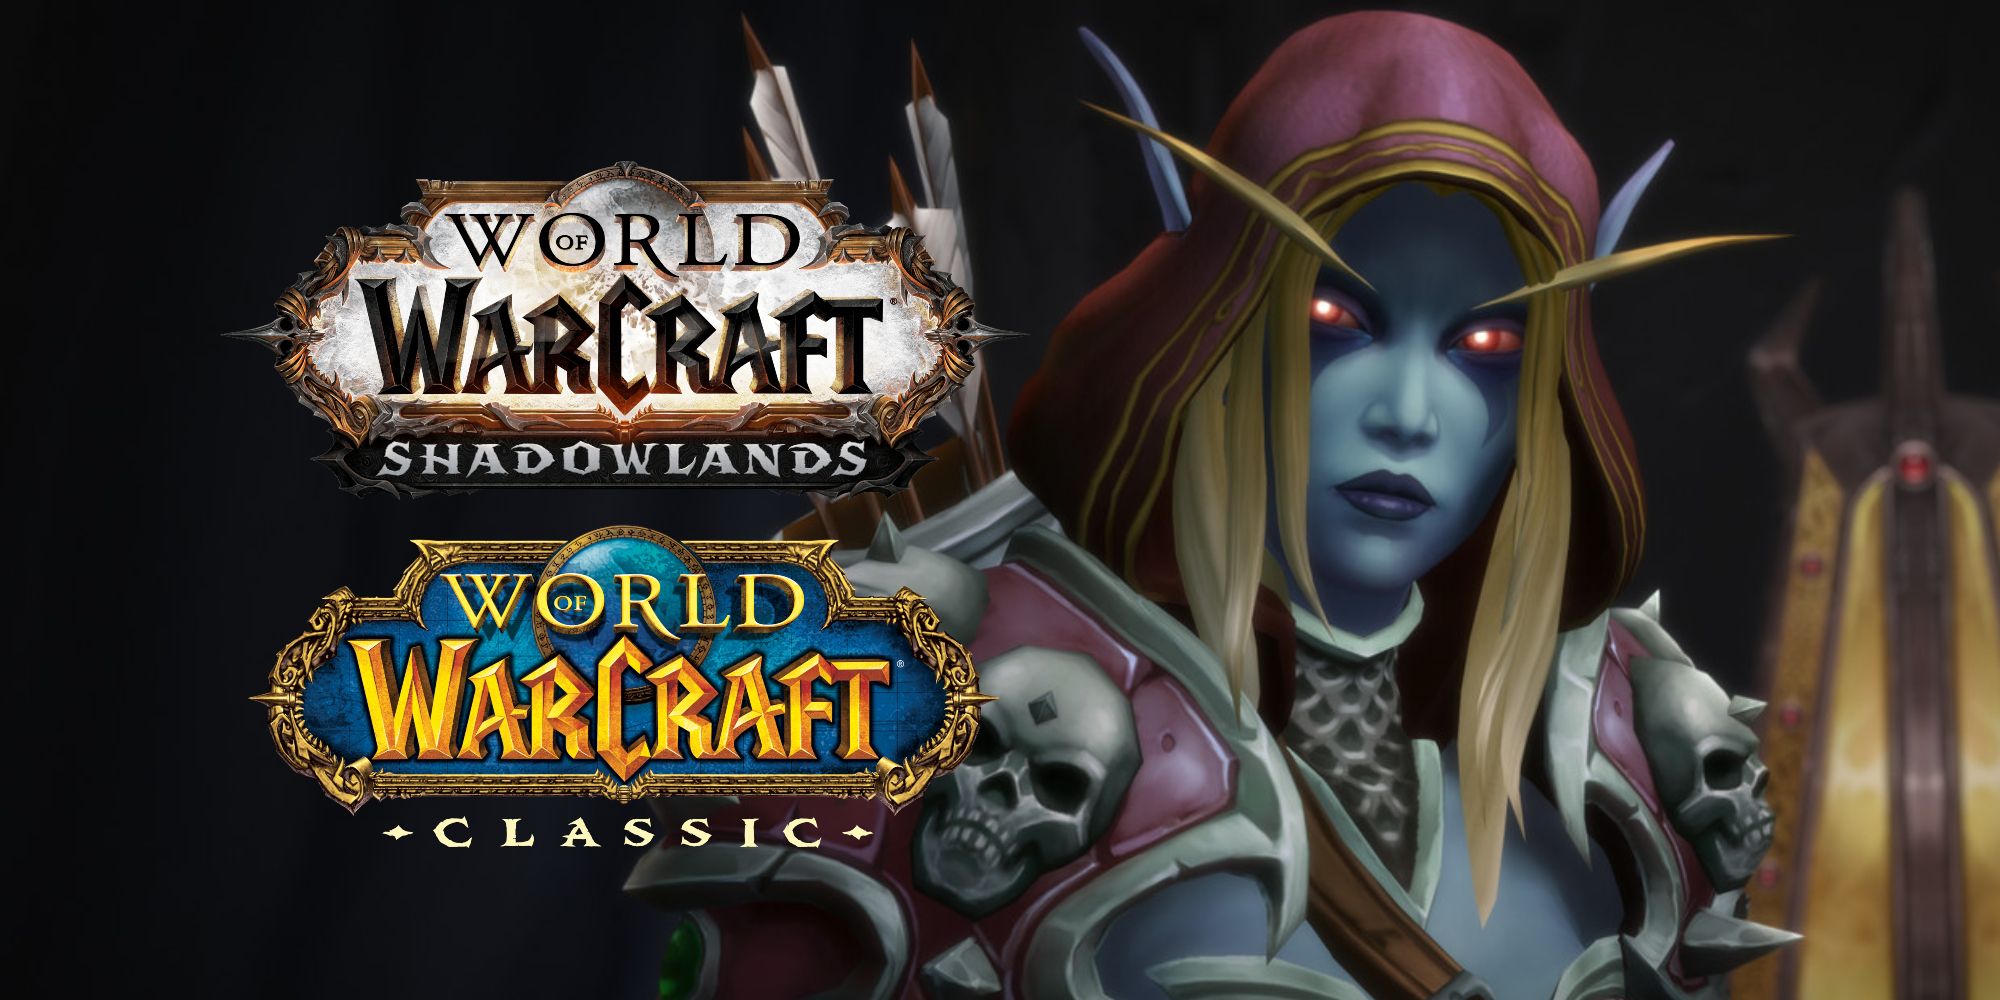 World Of Warcraft Removing Inappropriate References Following Lawsuit [UPDATED]